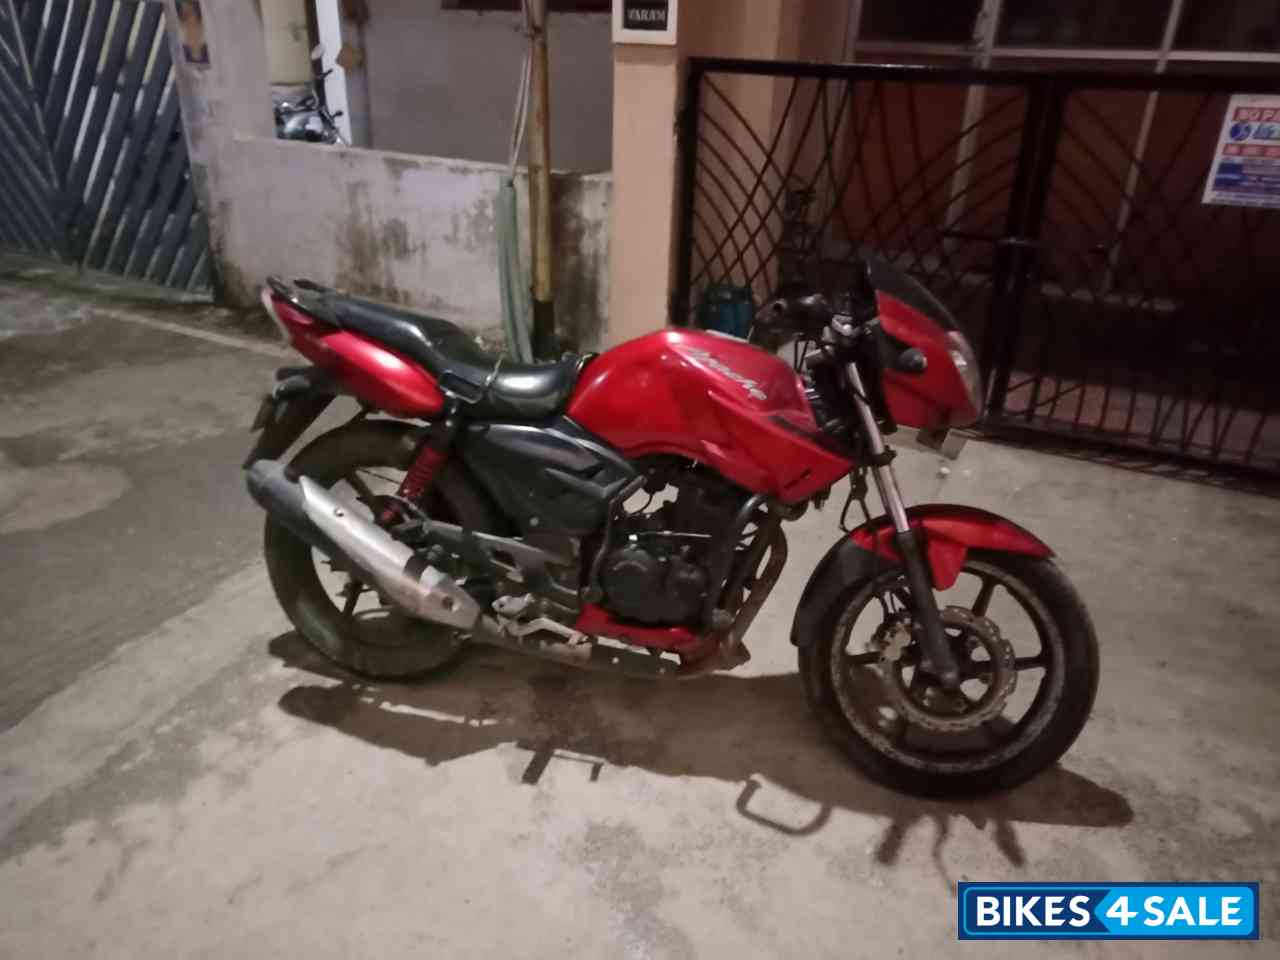 Used 10 Model Tvs Apache Rtr 160 For Sale In Chennai Id Bikes4sale